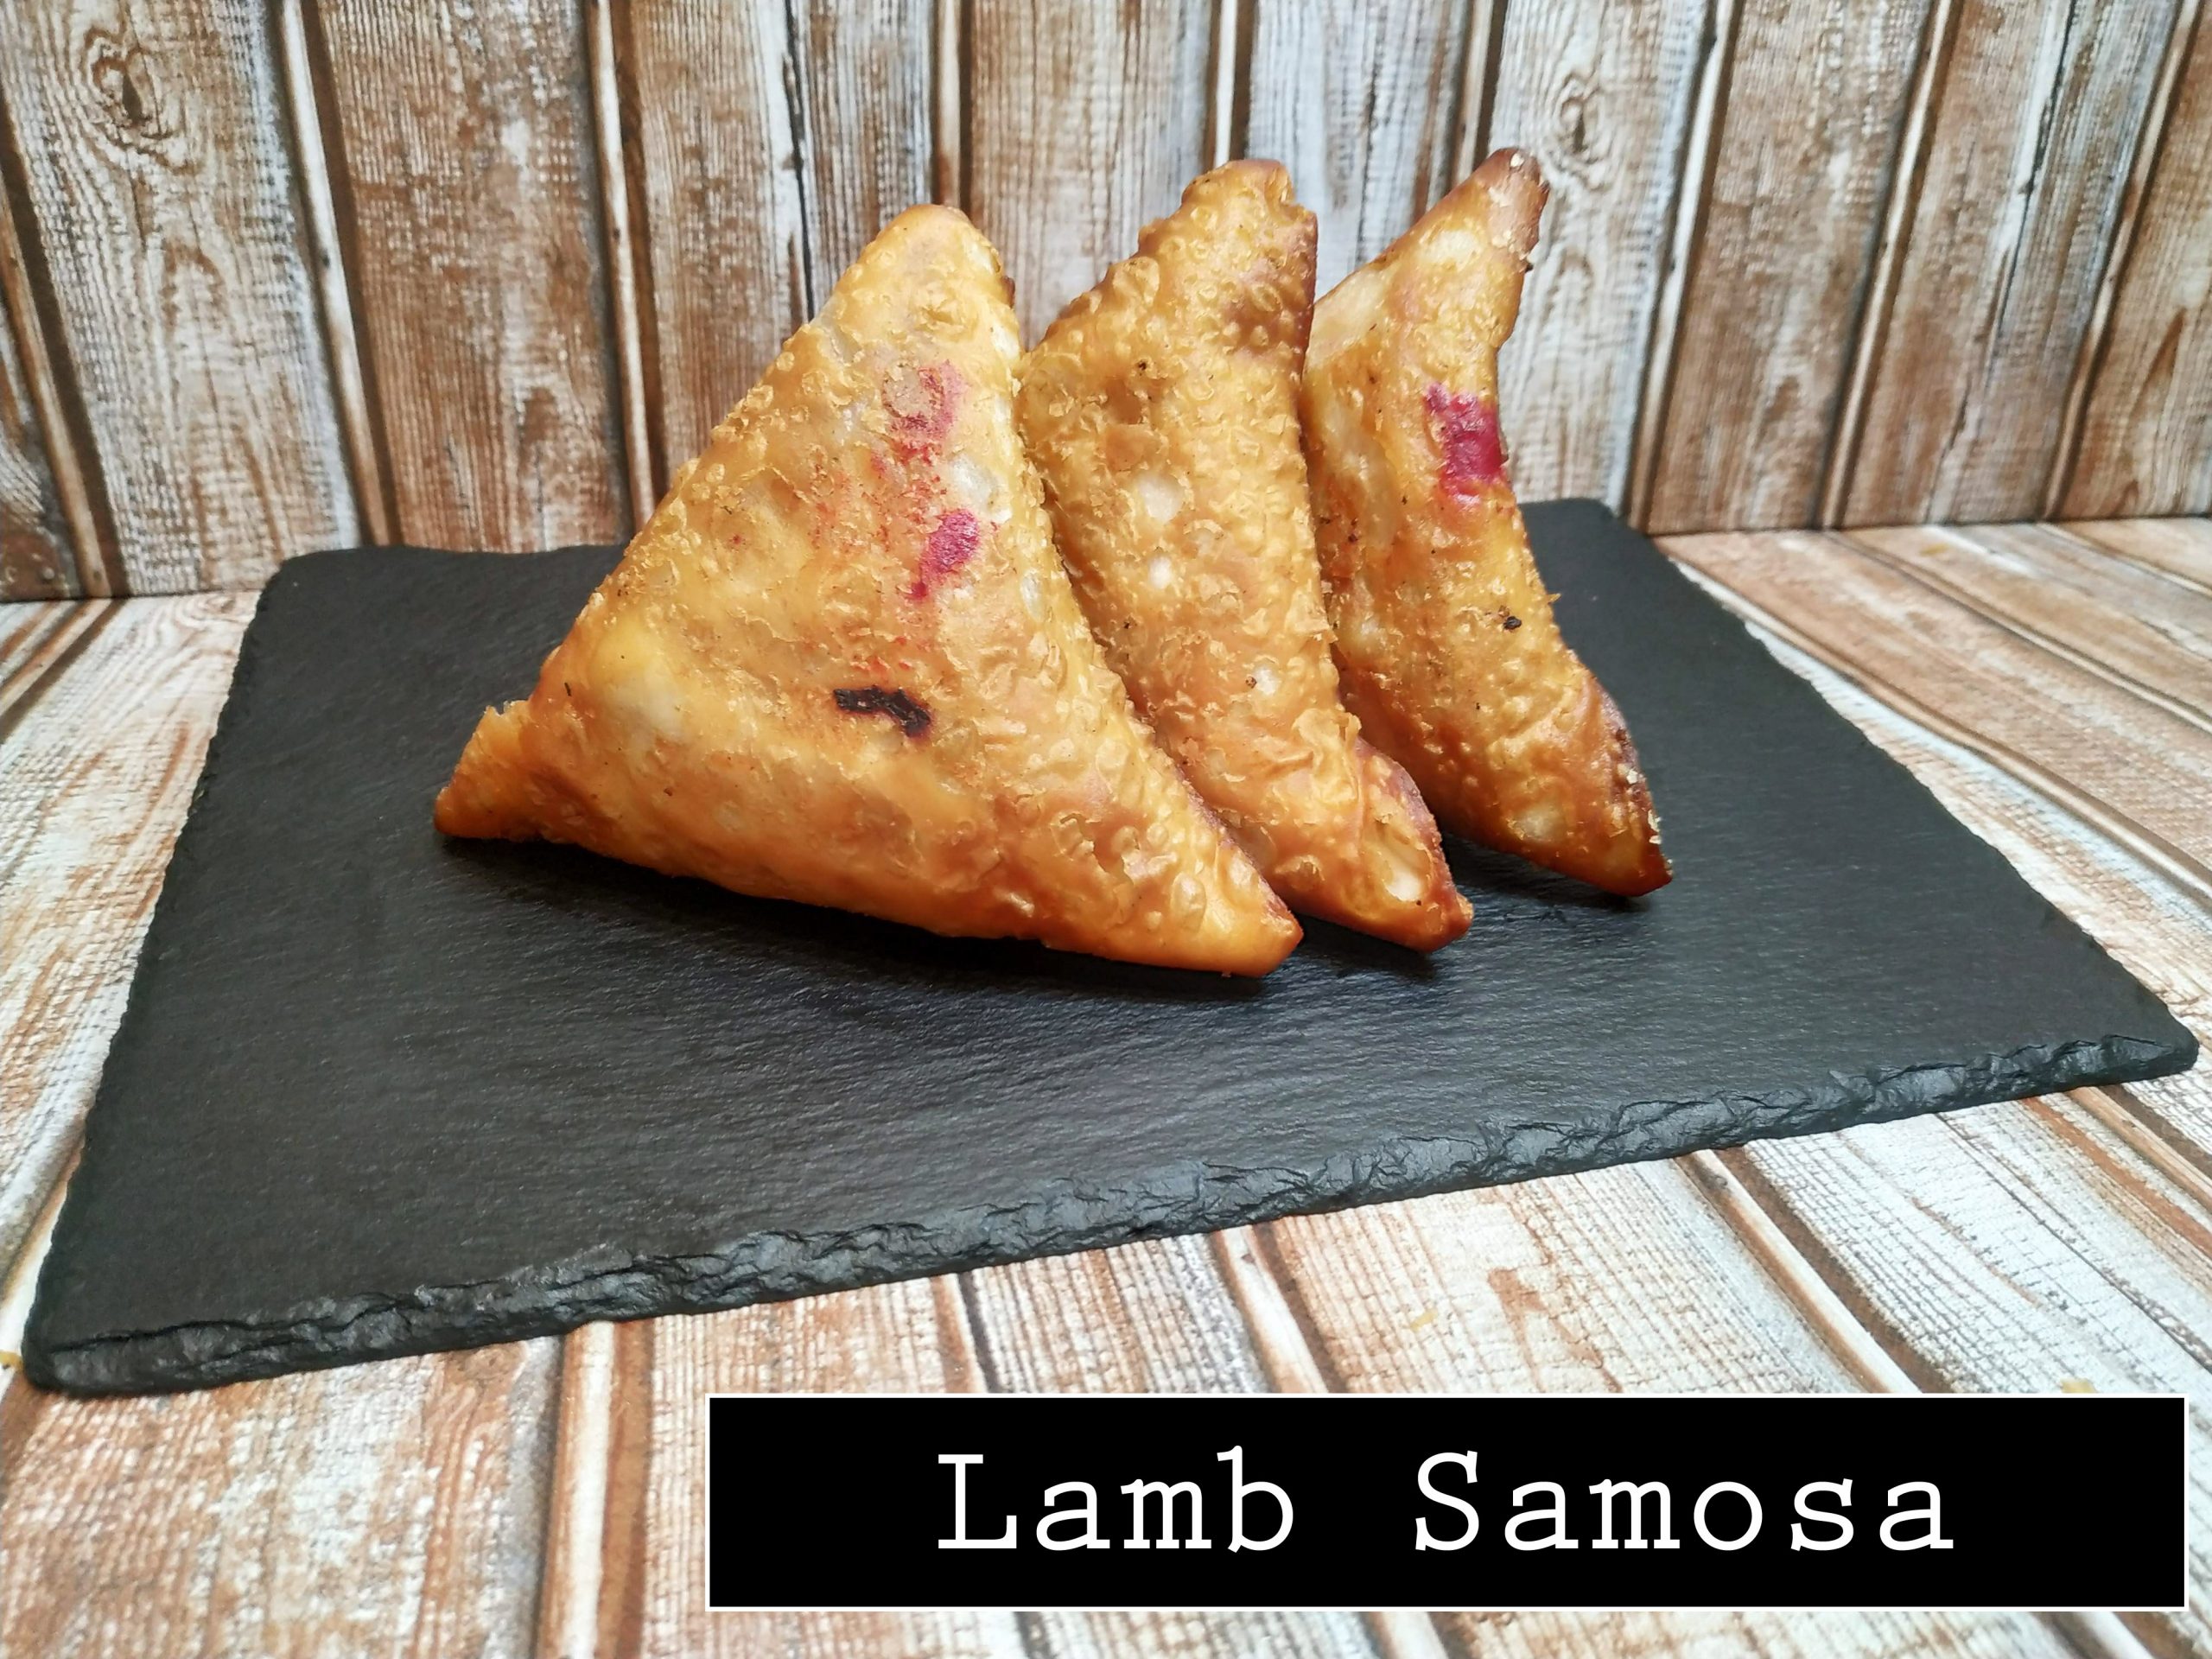 Lamb Samosa by Sandwich in the Square